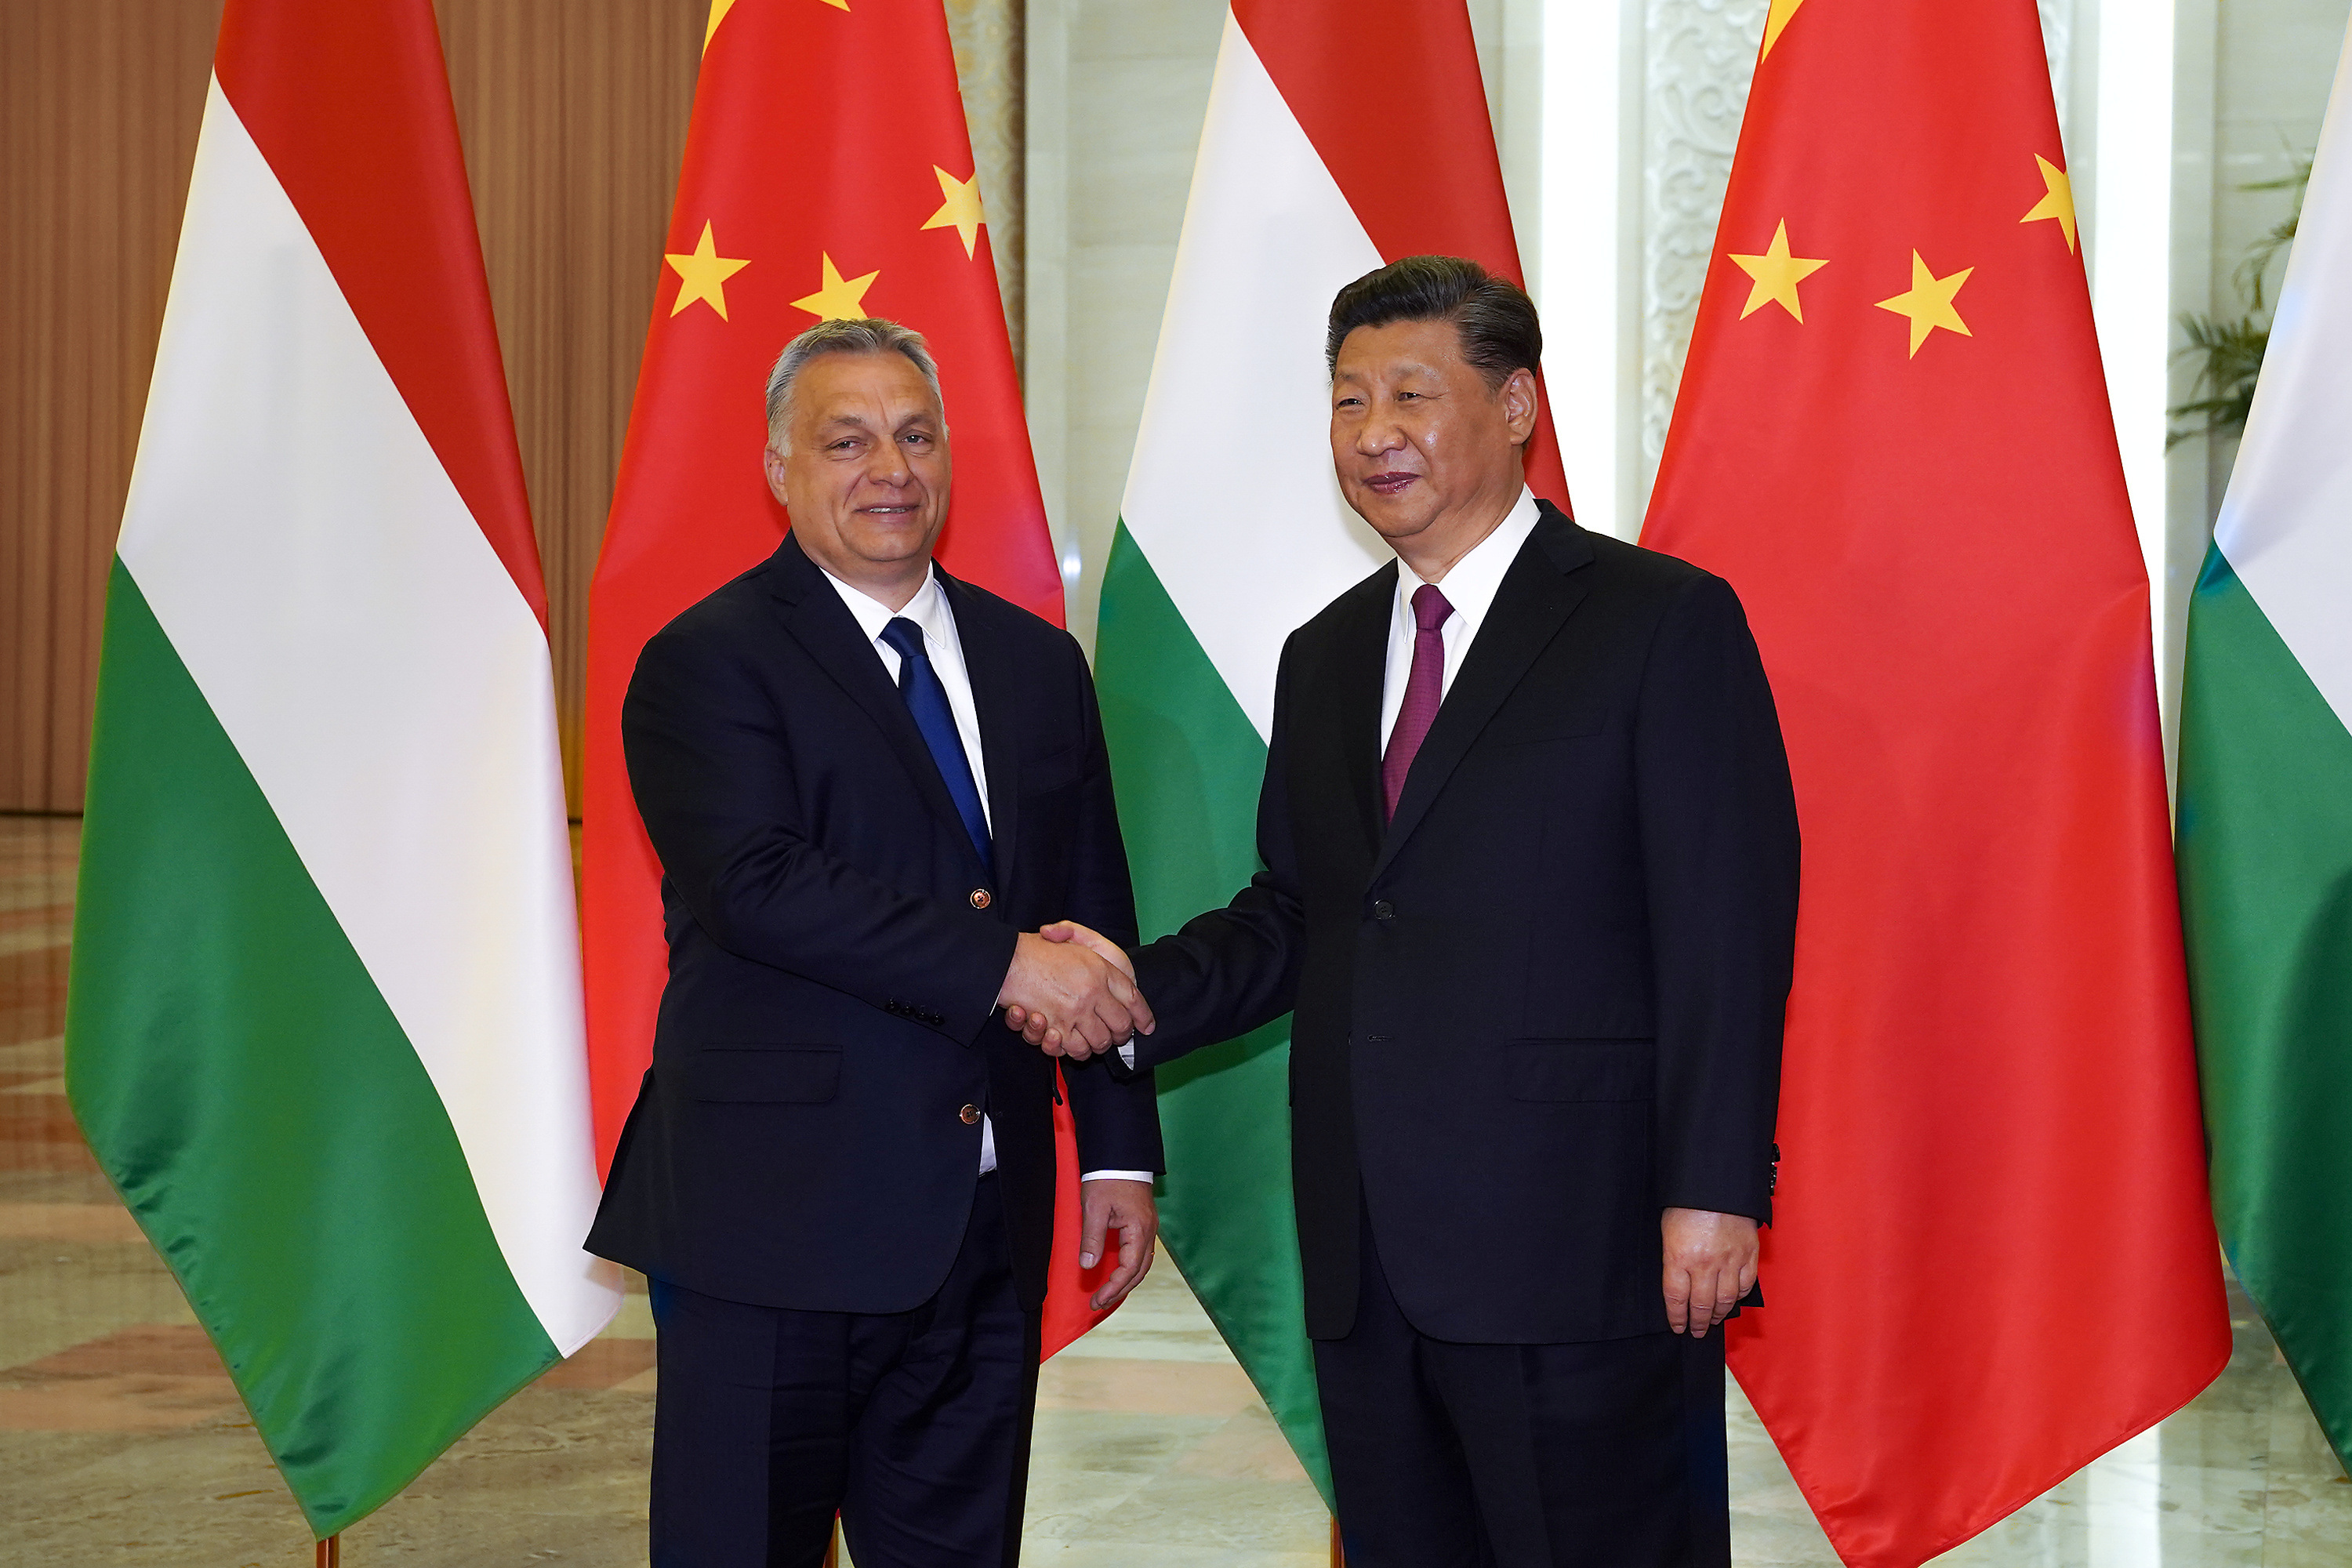 Chinese President Xi Jinping meets with Hungarian Prime Minister Viktor Orban in Beijing